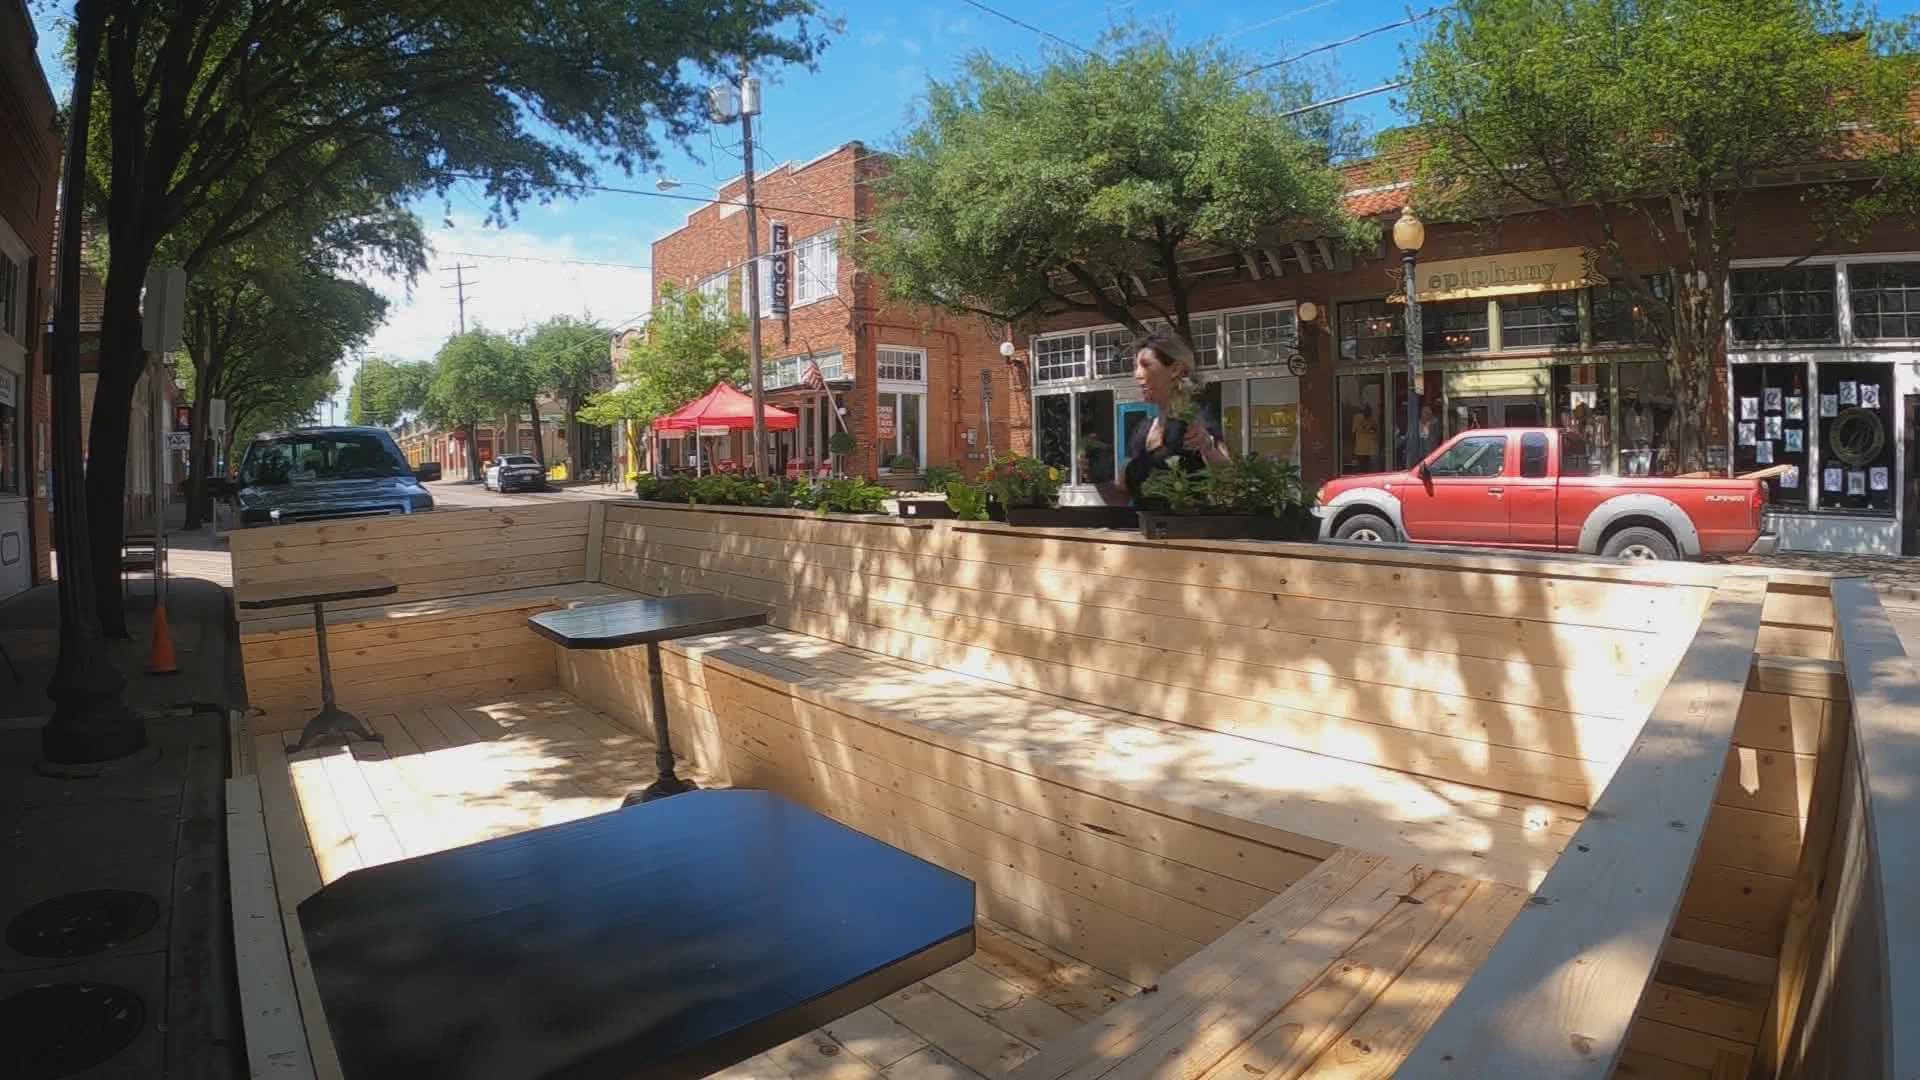 A deck-like structure extended off the sidewalk could provide more outdoor seating options in areas across Dallas, if City Council approves.